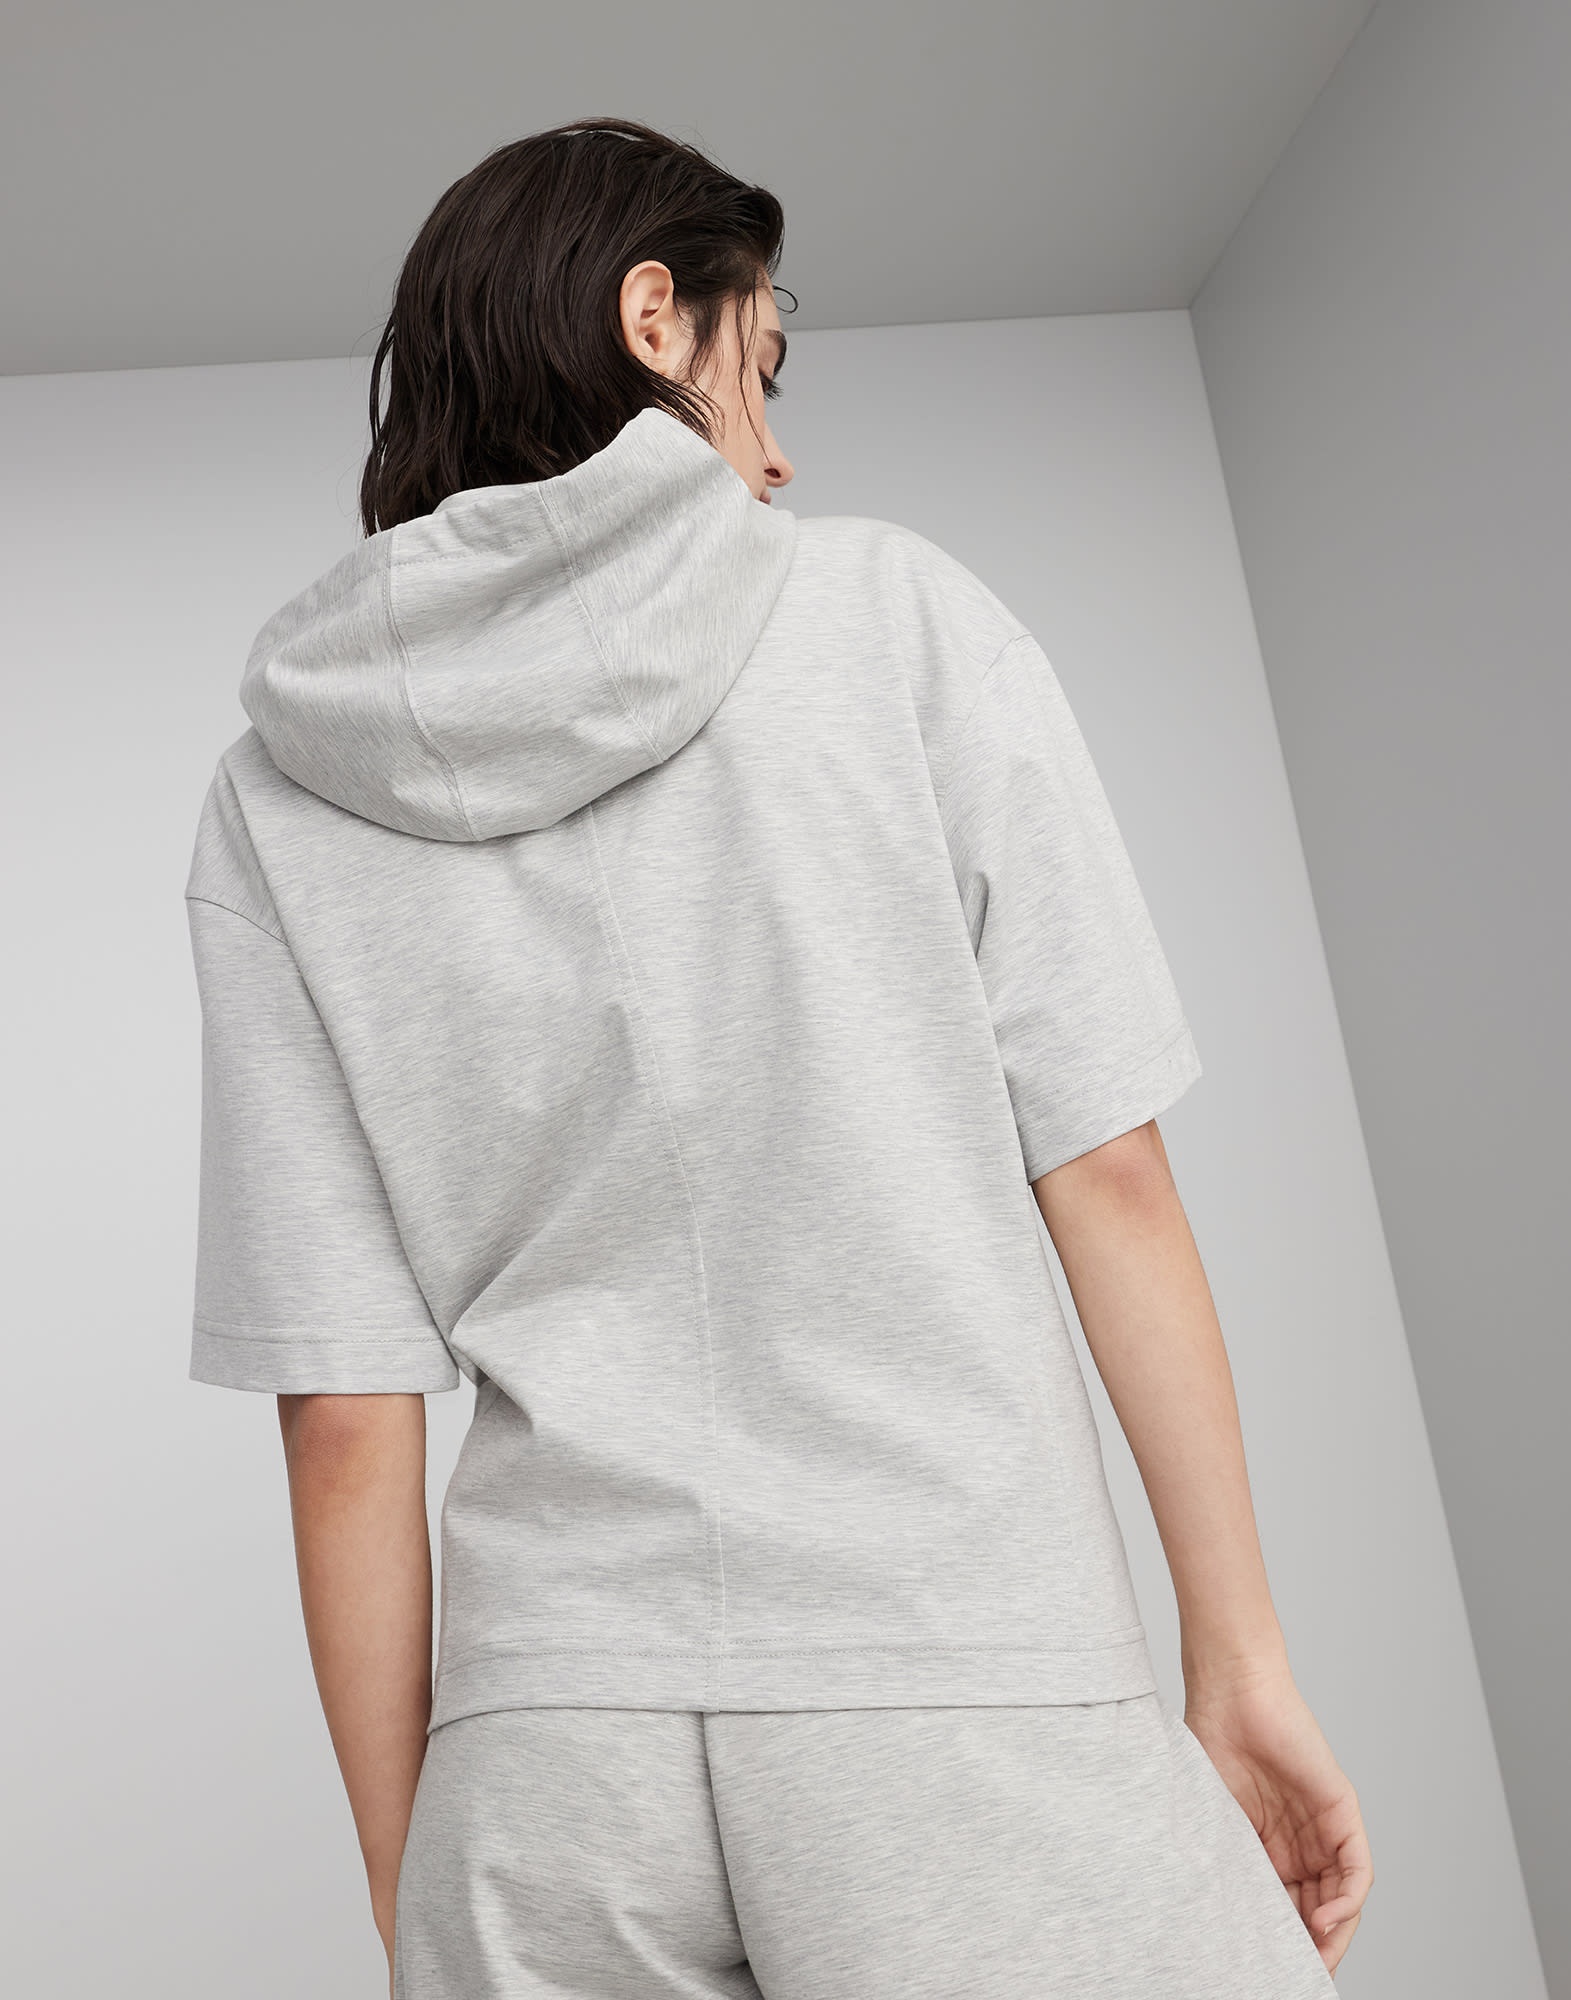 Couture interlock hooded sweatshirt with shiny zipper pull - 2